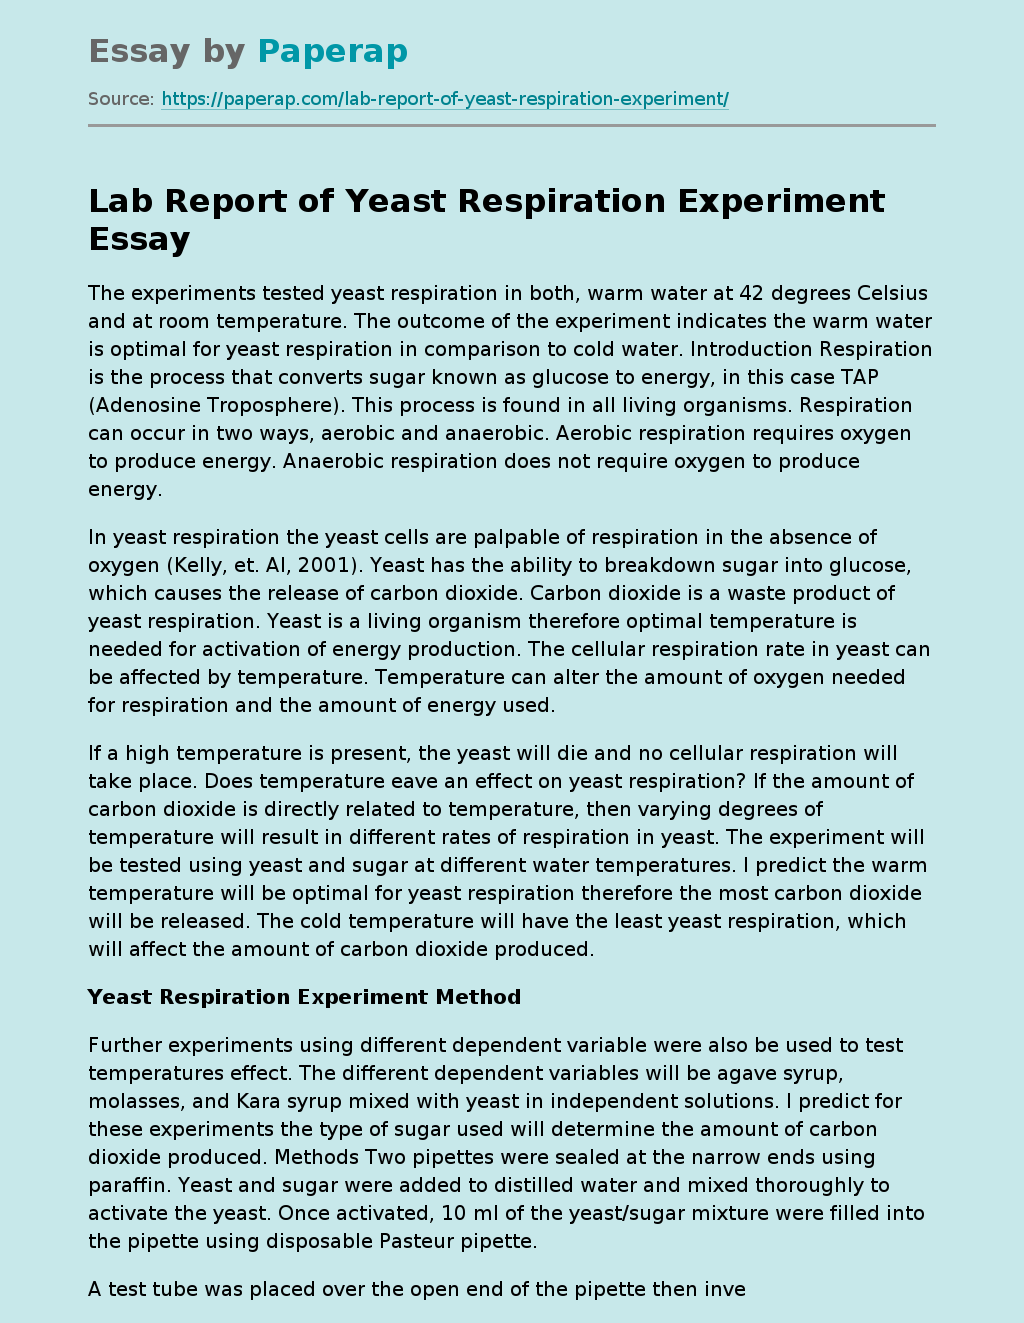 Lab Report of Yeast Respiration Experiment